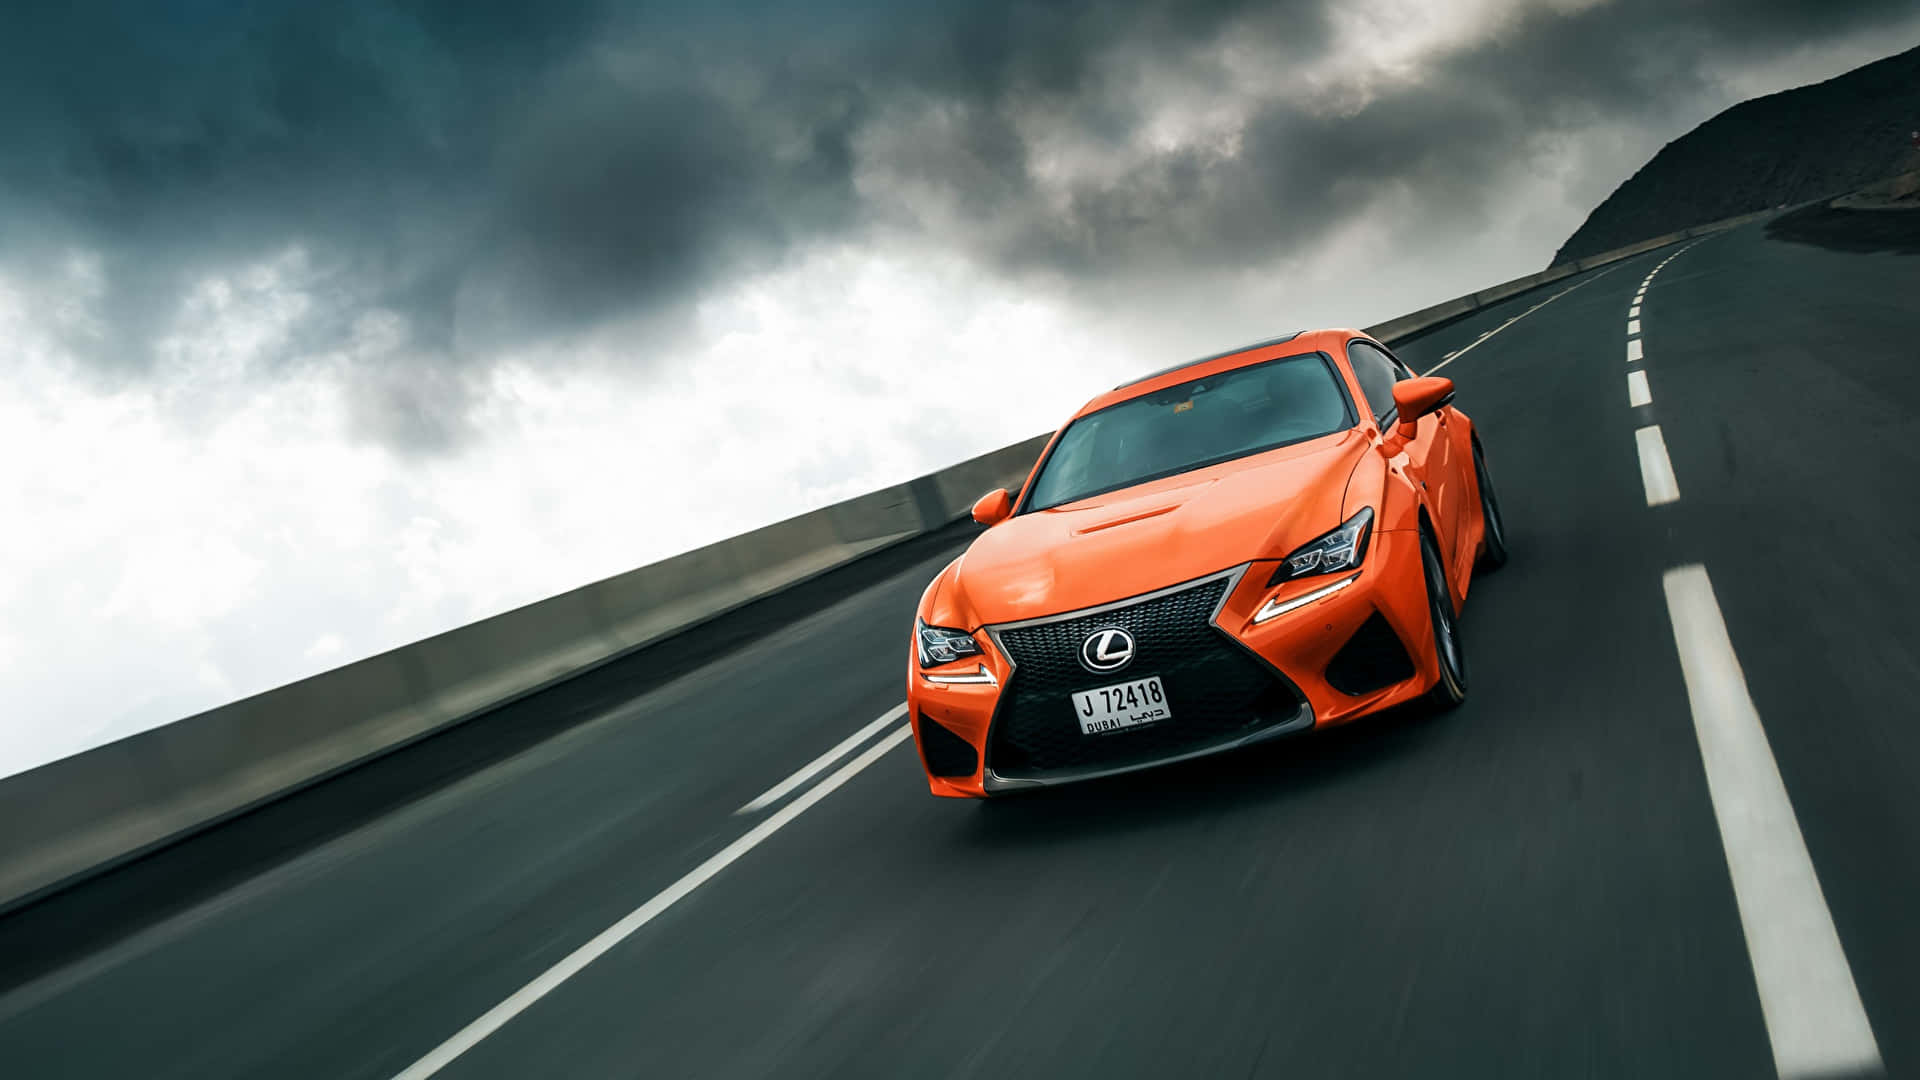 Powerful Lexus RC F showcasing its dynamic design and sporty stance. Wallpaper